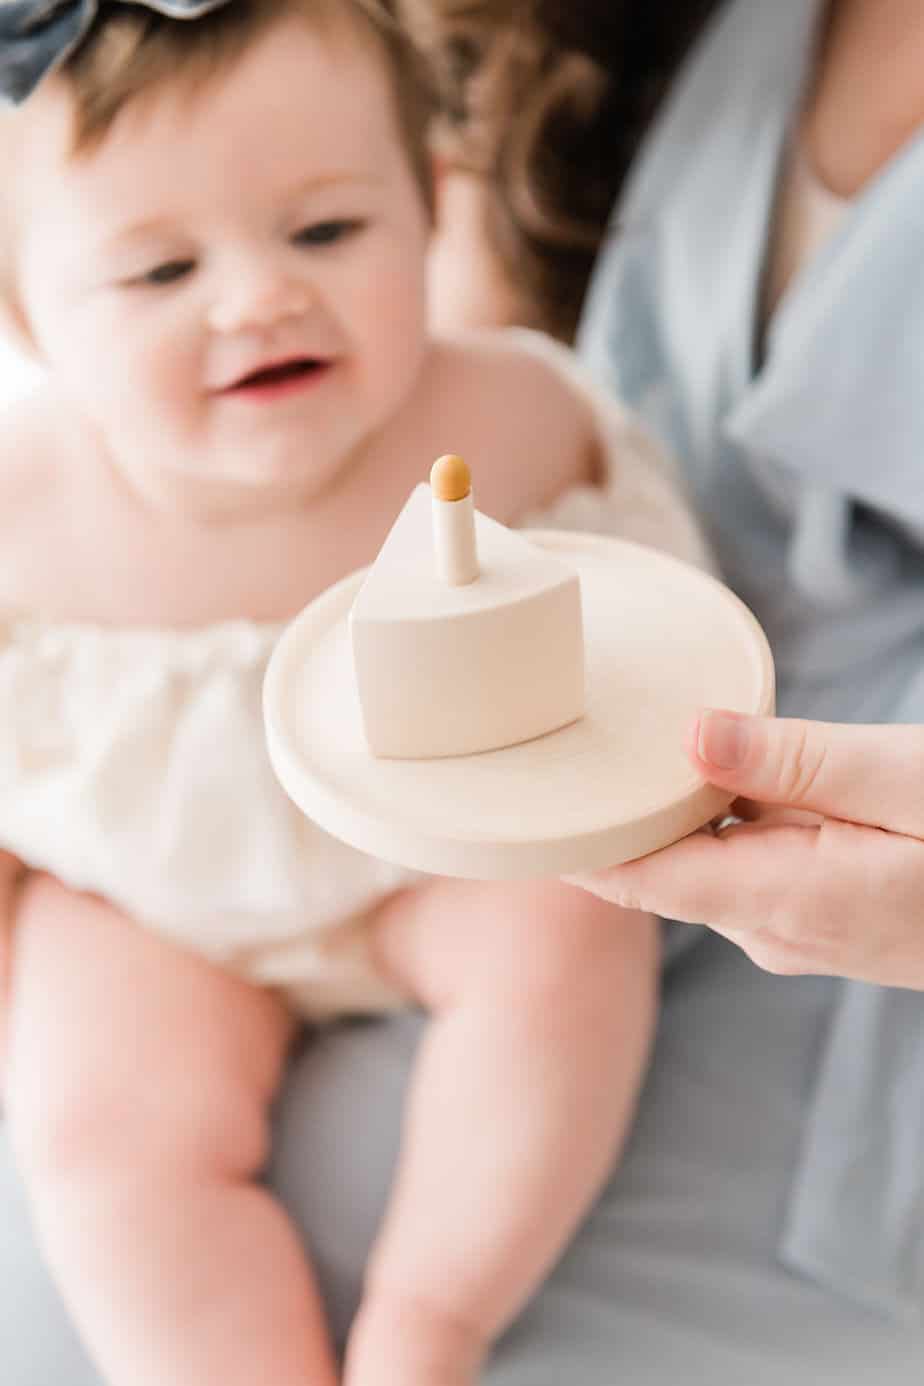 mother holding up a wooden cake with one candle while her daughter smiles down on it